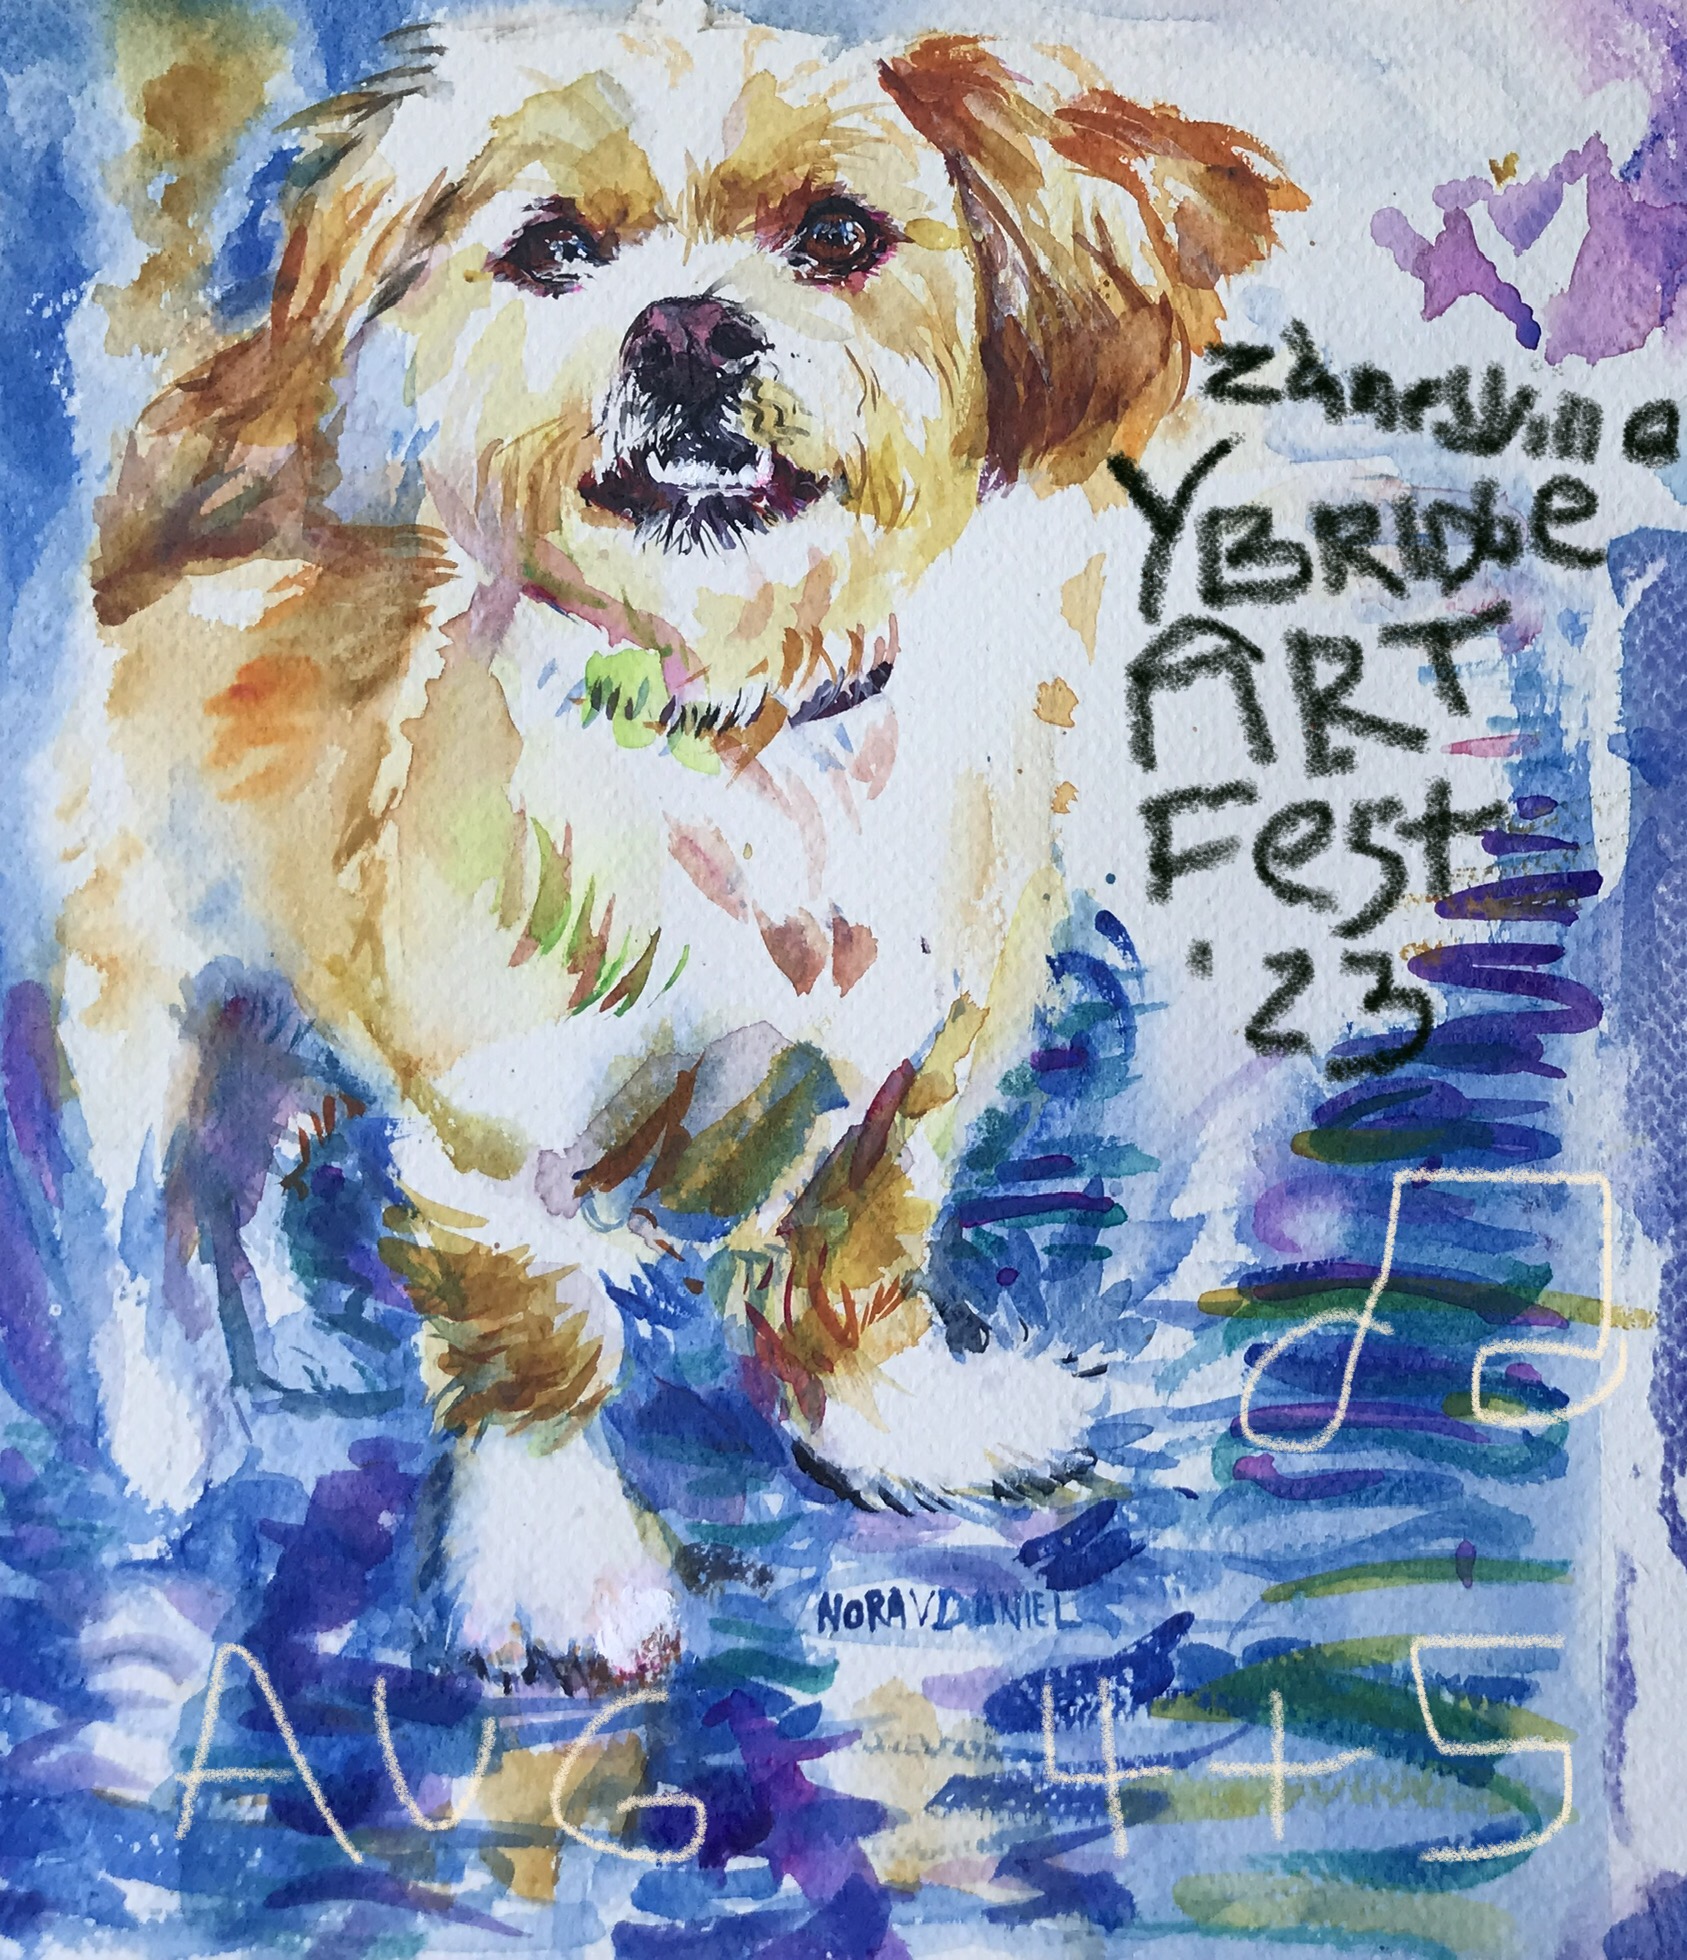 A poster for the Y-Bridge Arts festival, which shows a watercolor of a yellow, long haired, small dog.